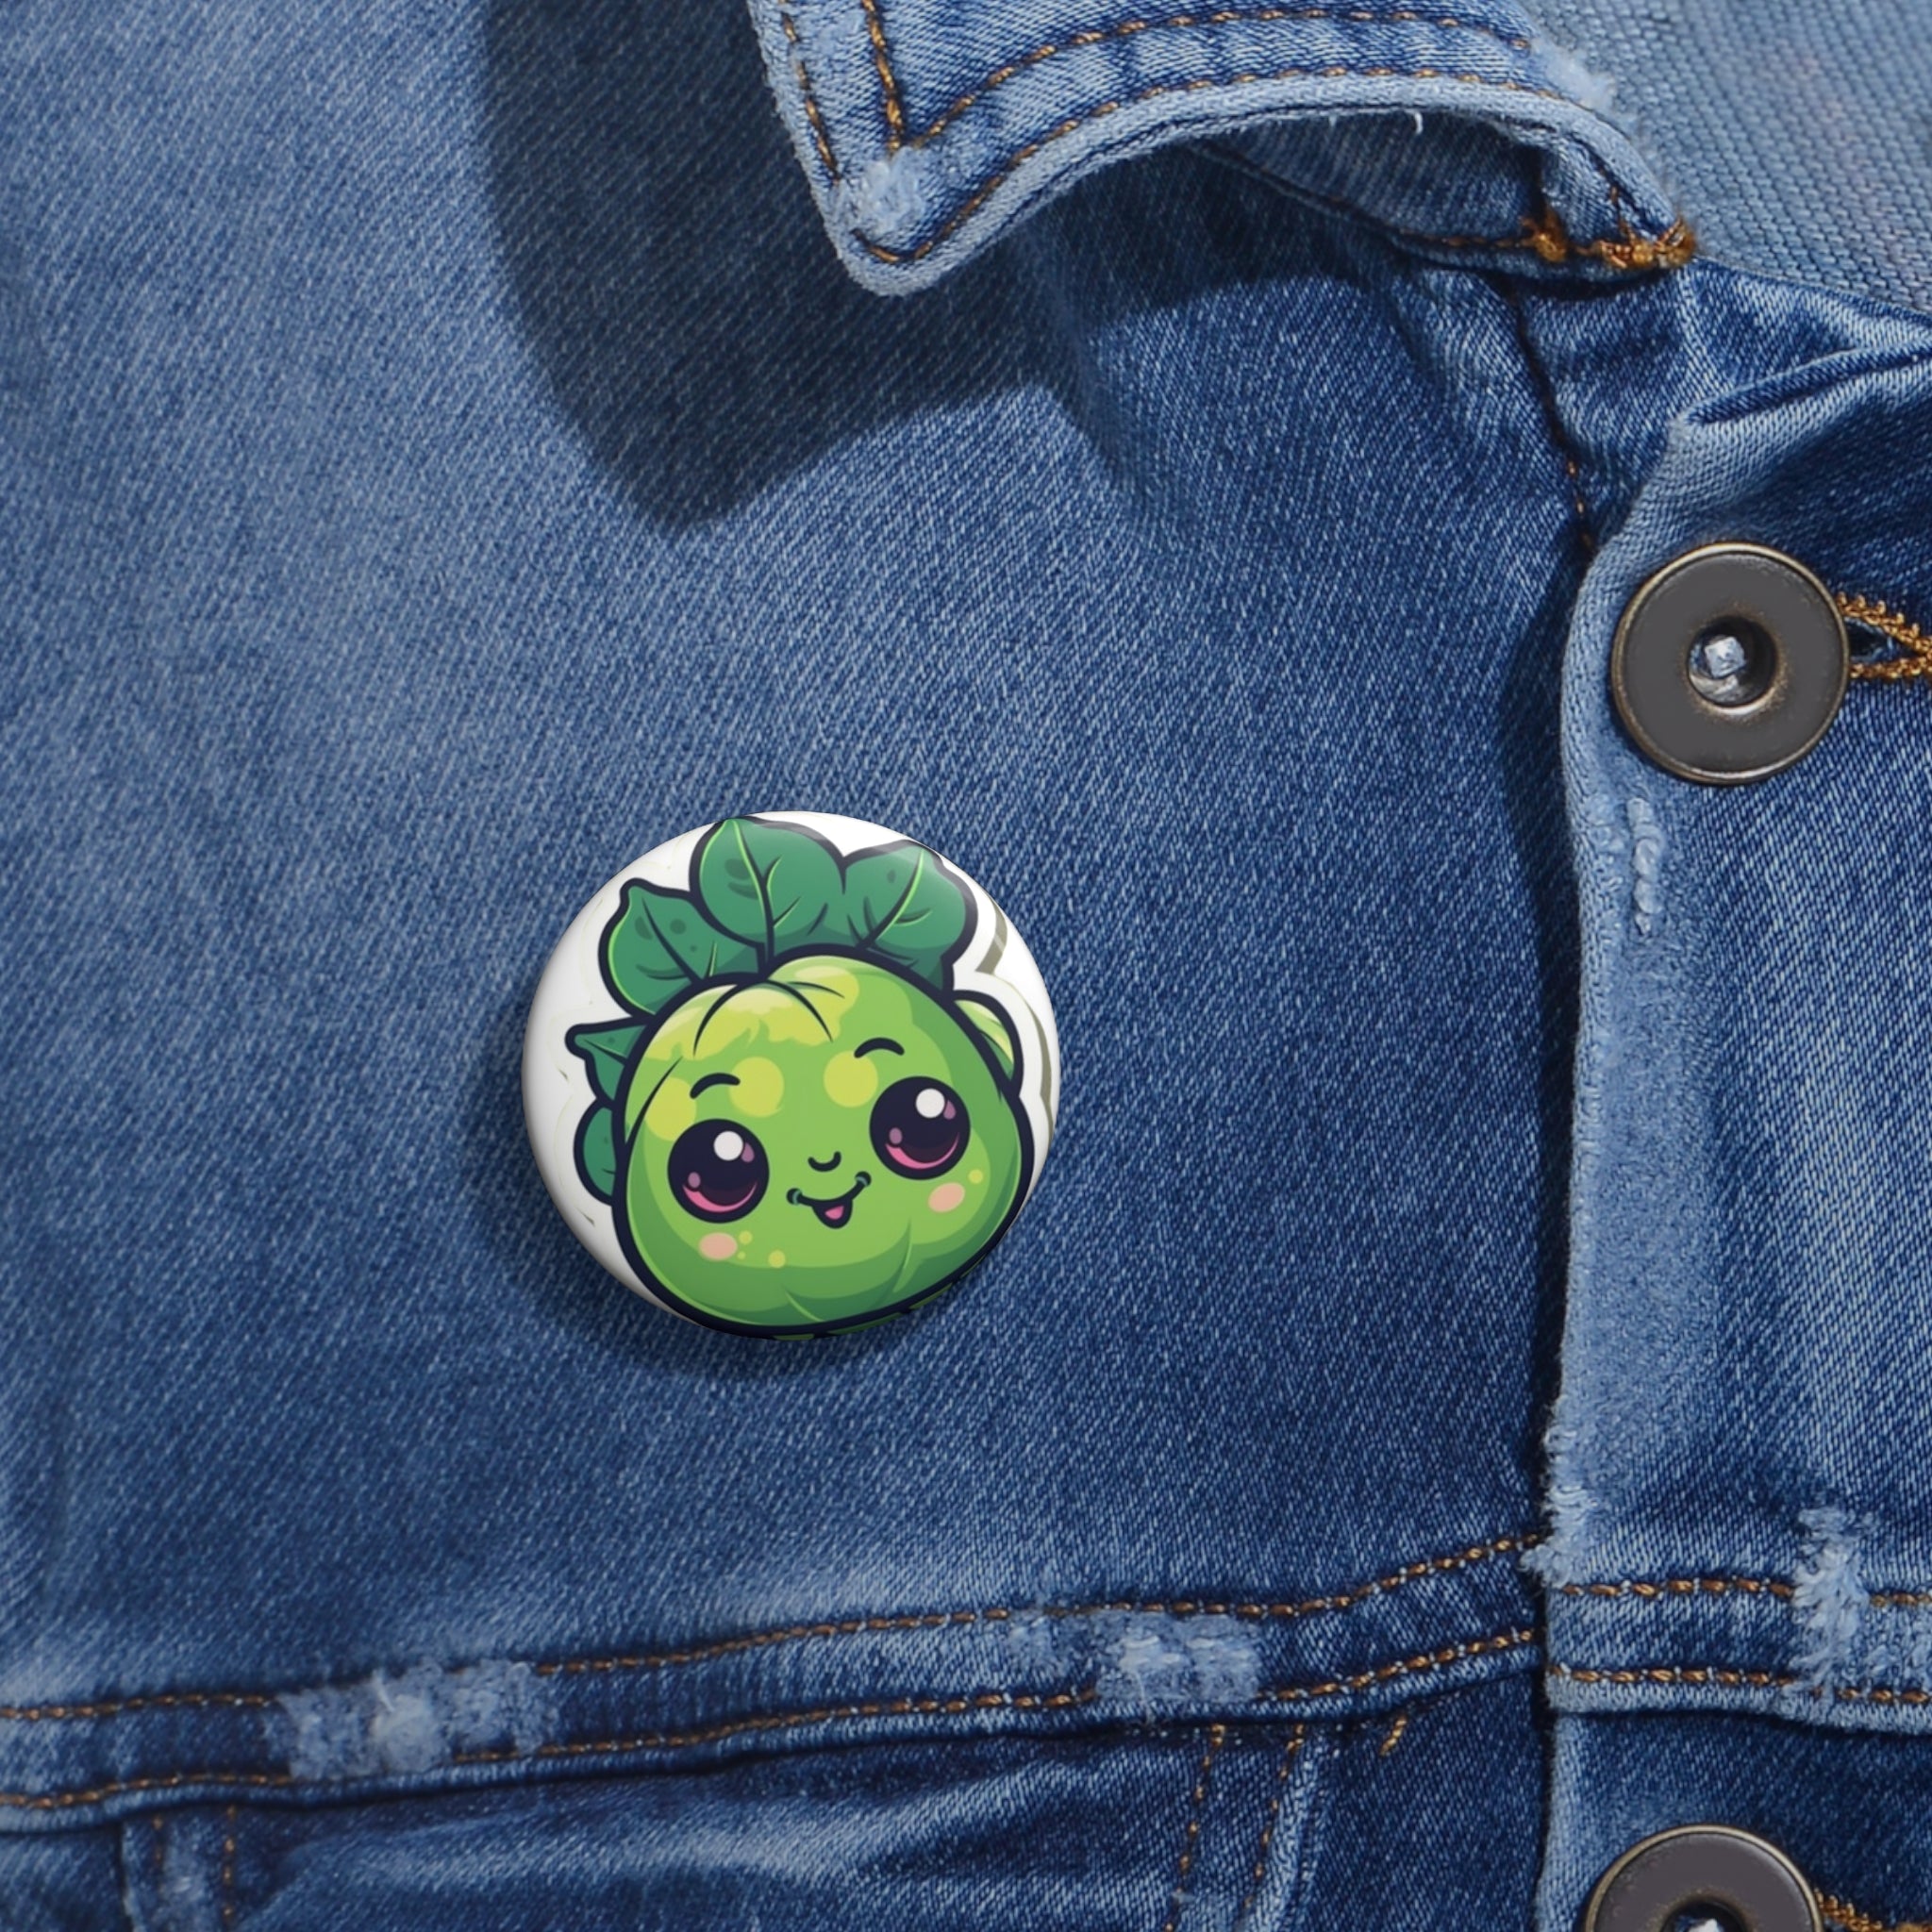 Custom Pin Buttons - Brussels Sprout